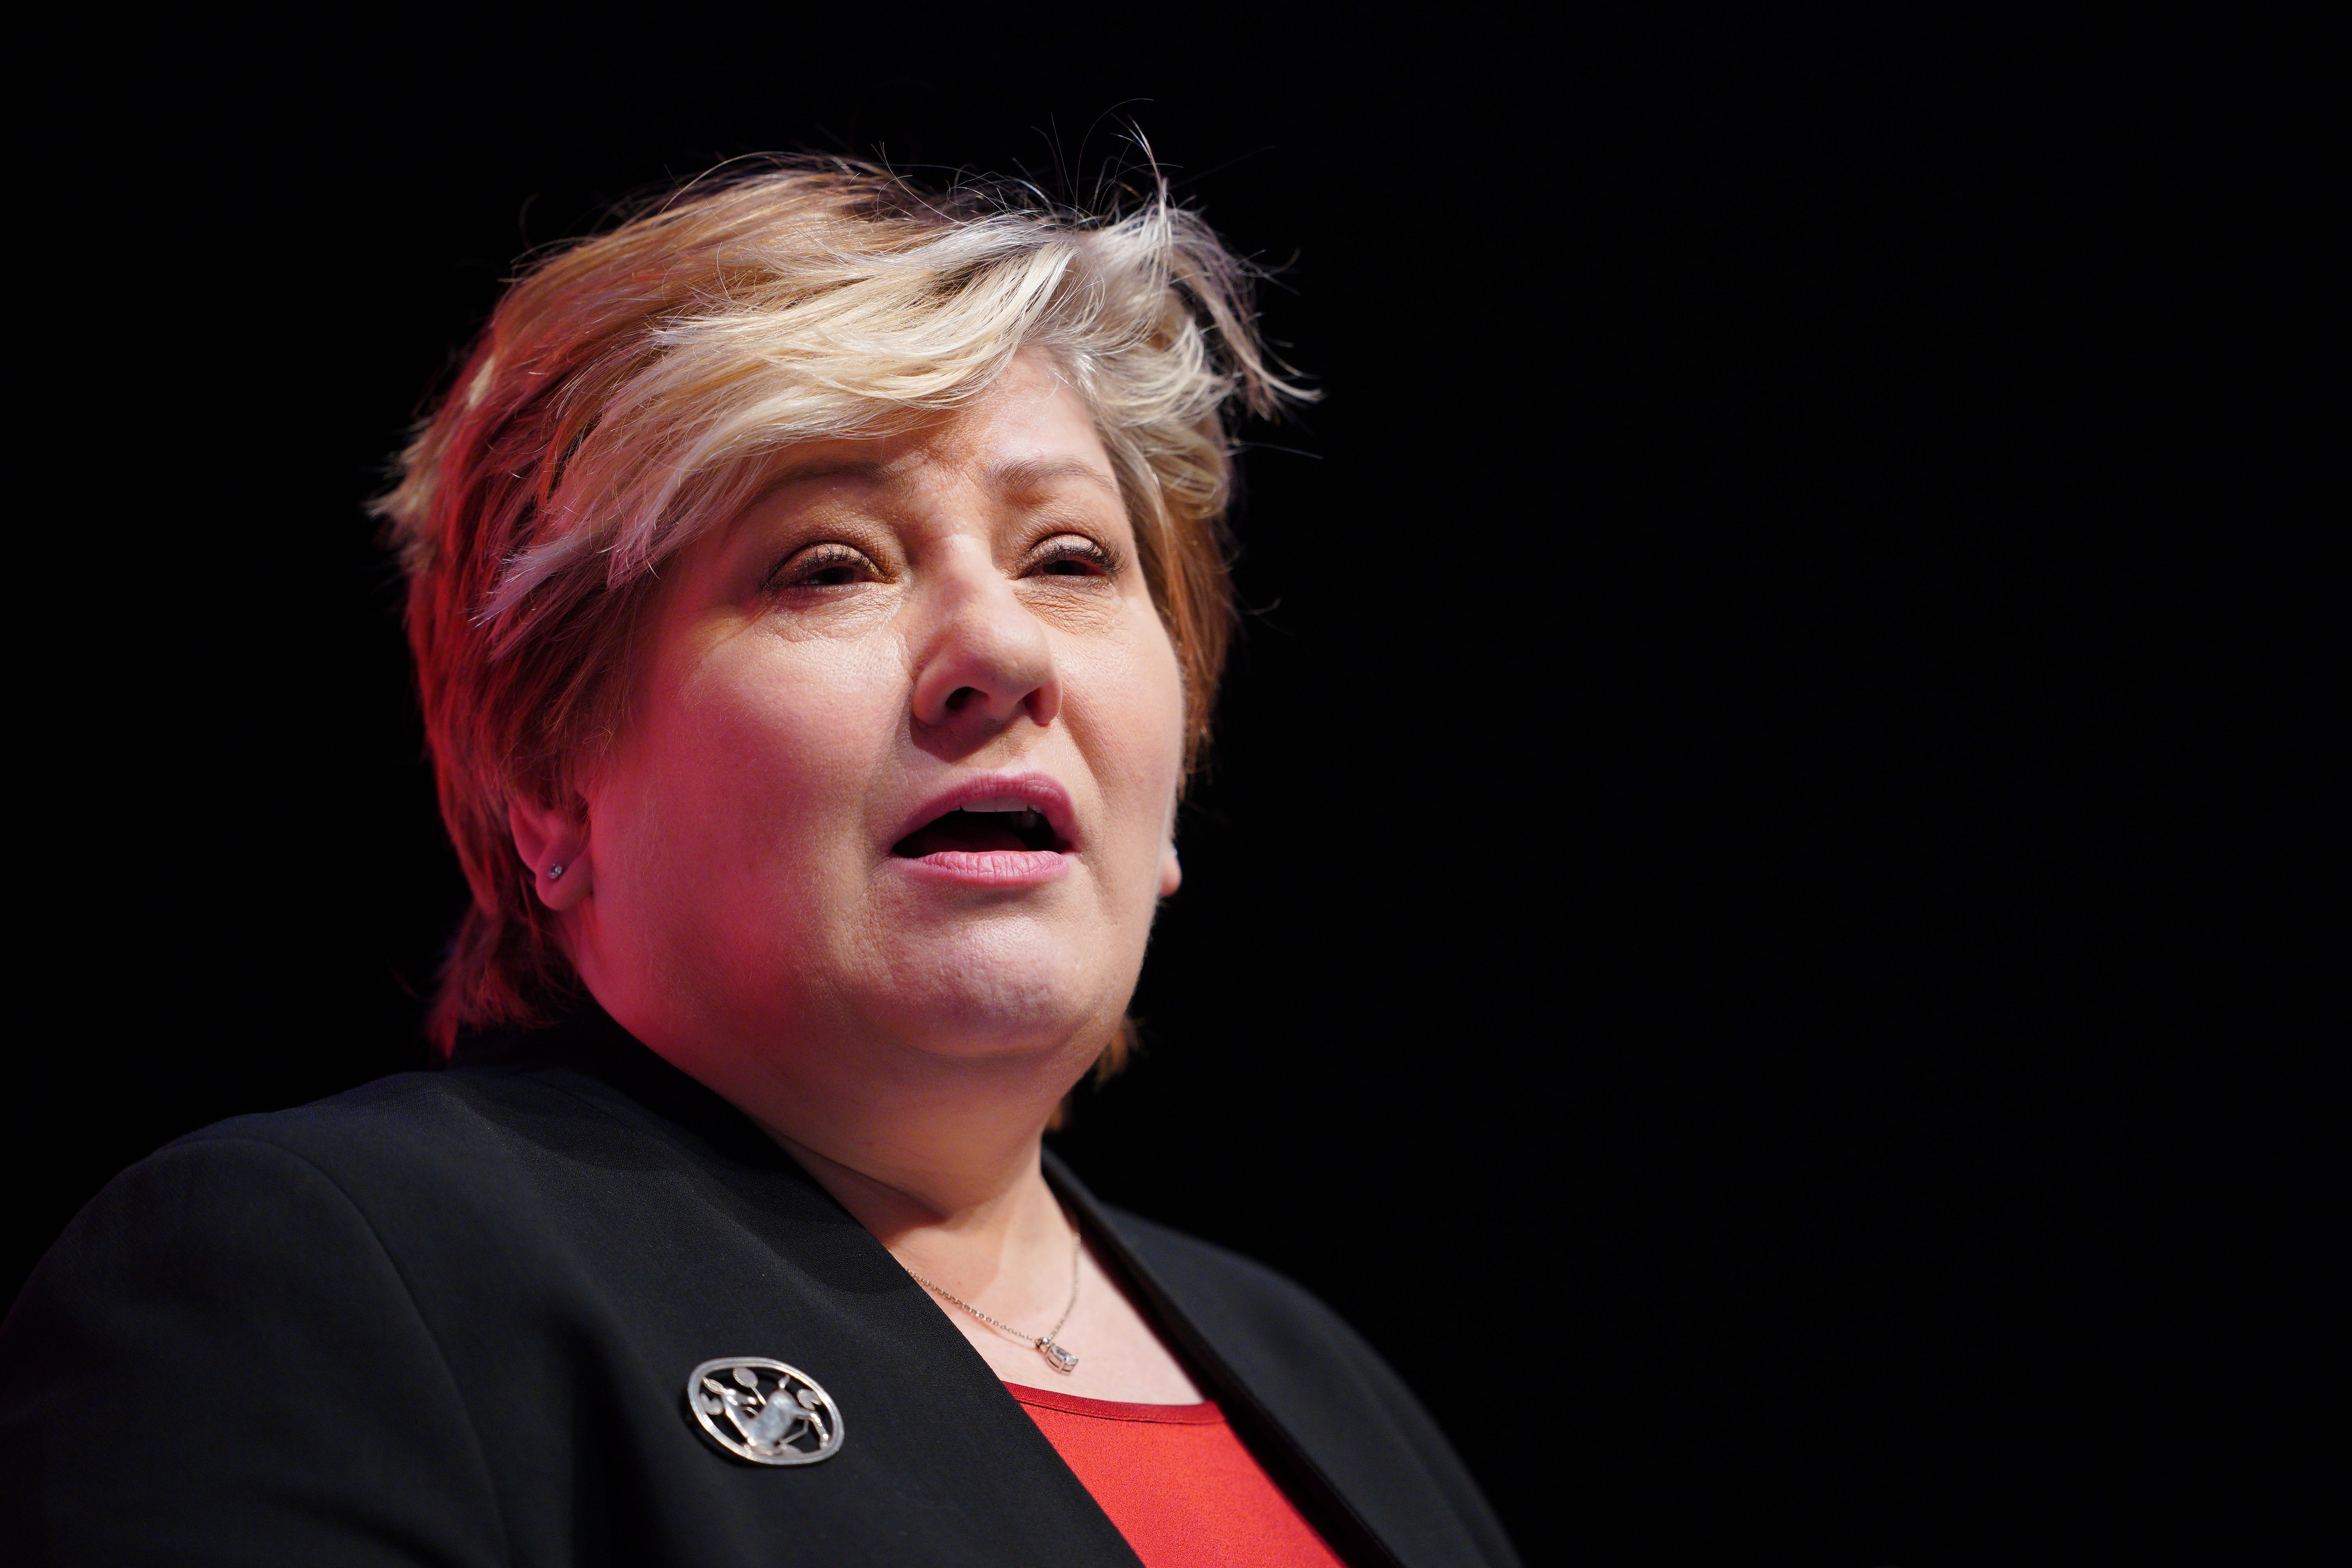 Emily Thornberry, the shadow attorney general, will oversee the proposals